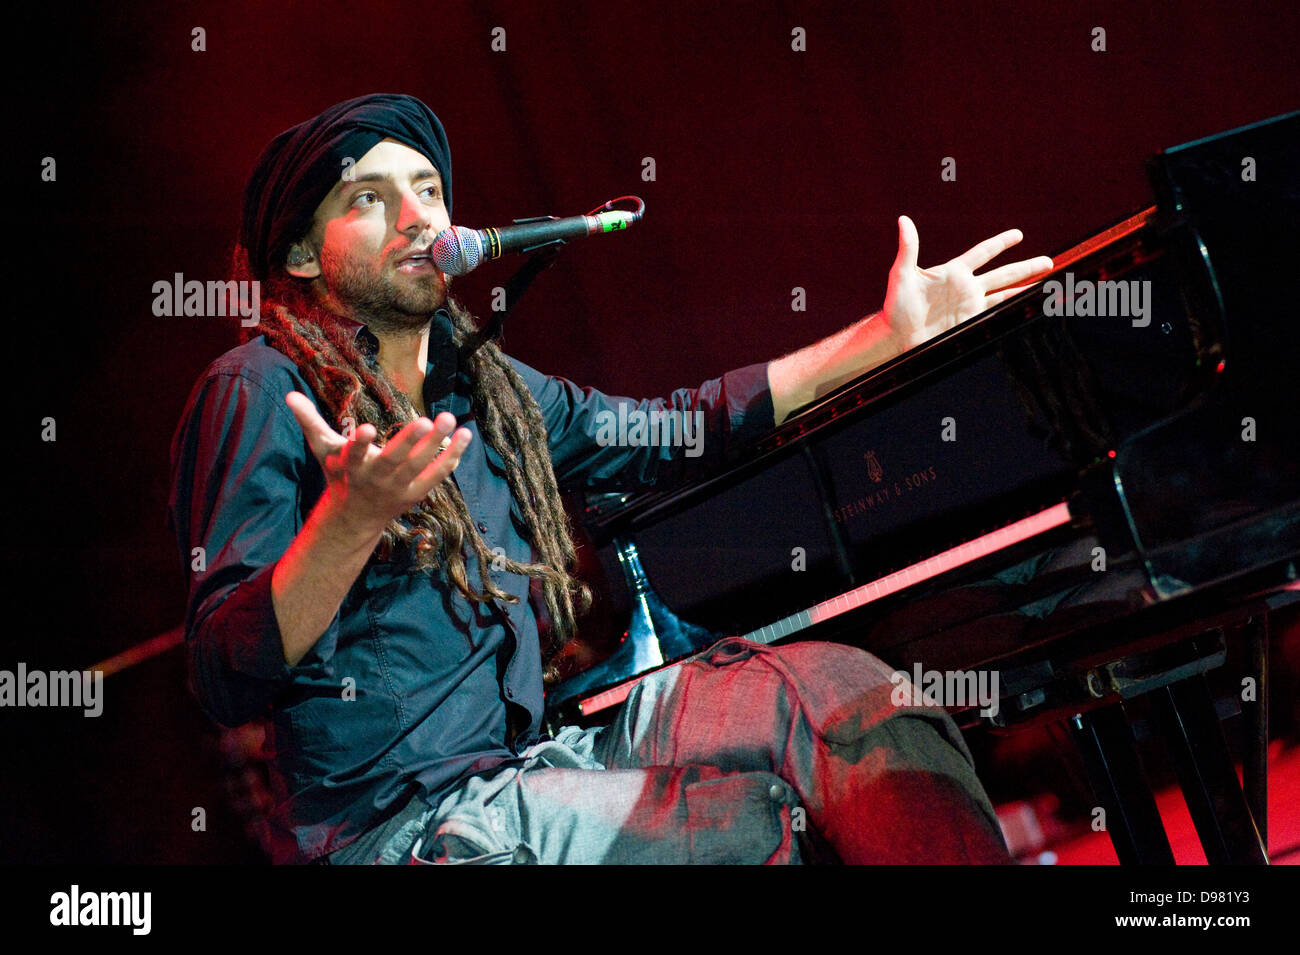 Idan Raichel Project on stage during Cross Culture Festival in Warsaw, Poland. Stock Photo